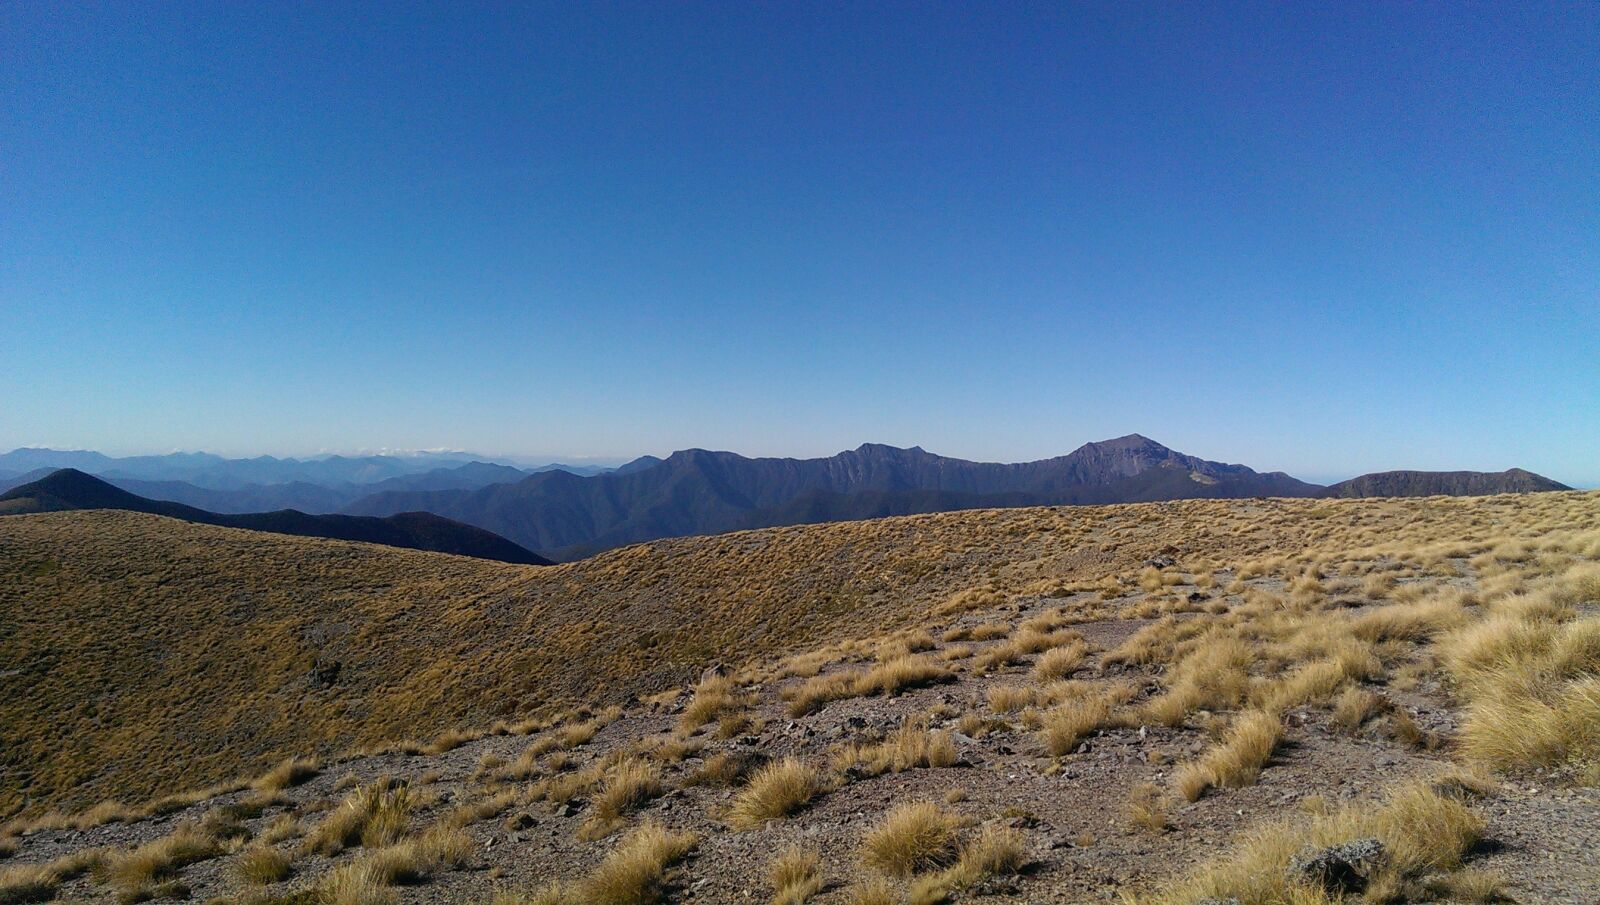 HTC ONE sample photo. Mountain, tussock, landscape photography